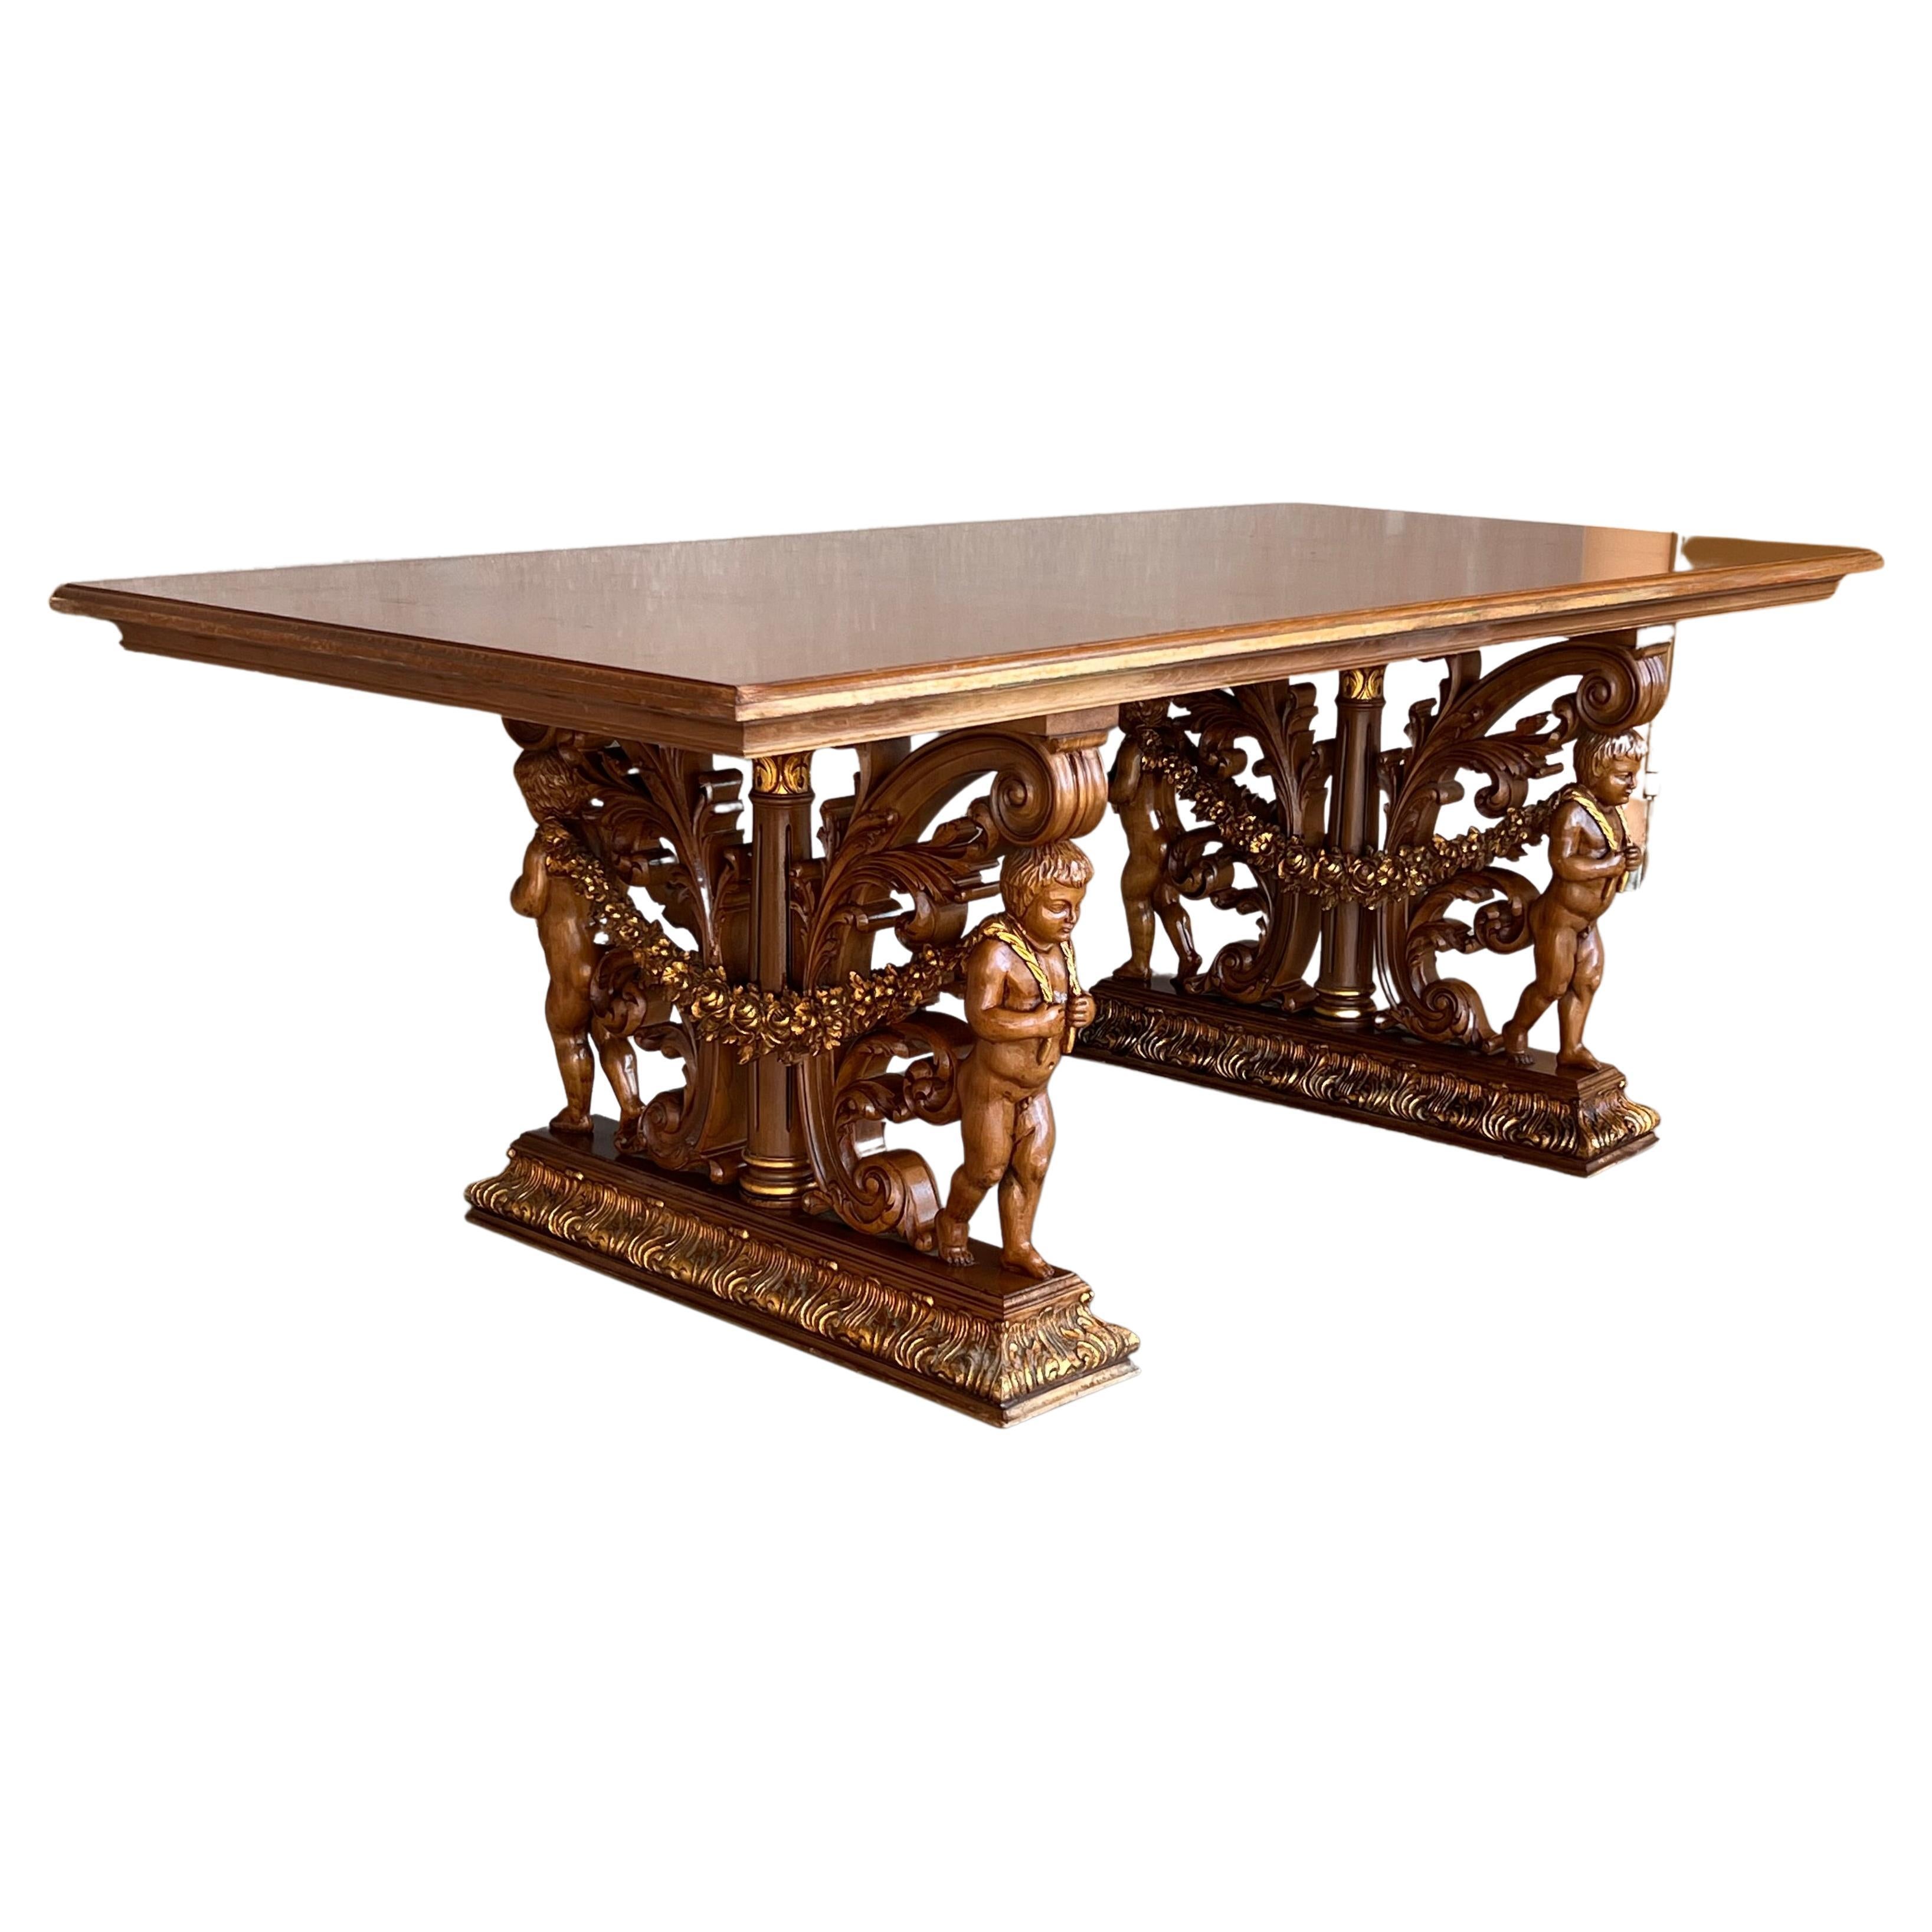 Early 20th Century French Carved Bleached Oak Marquetry Center or Dining Table For Sale